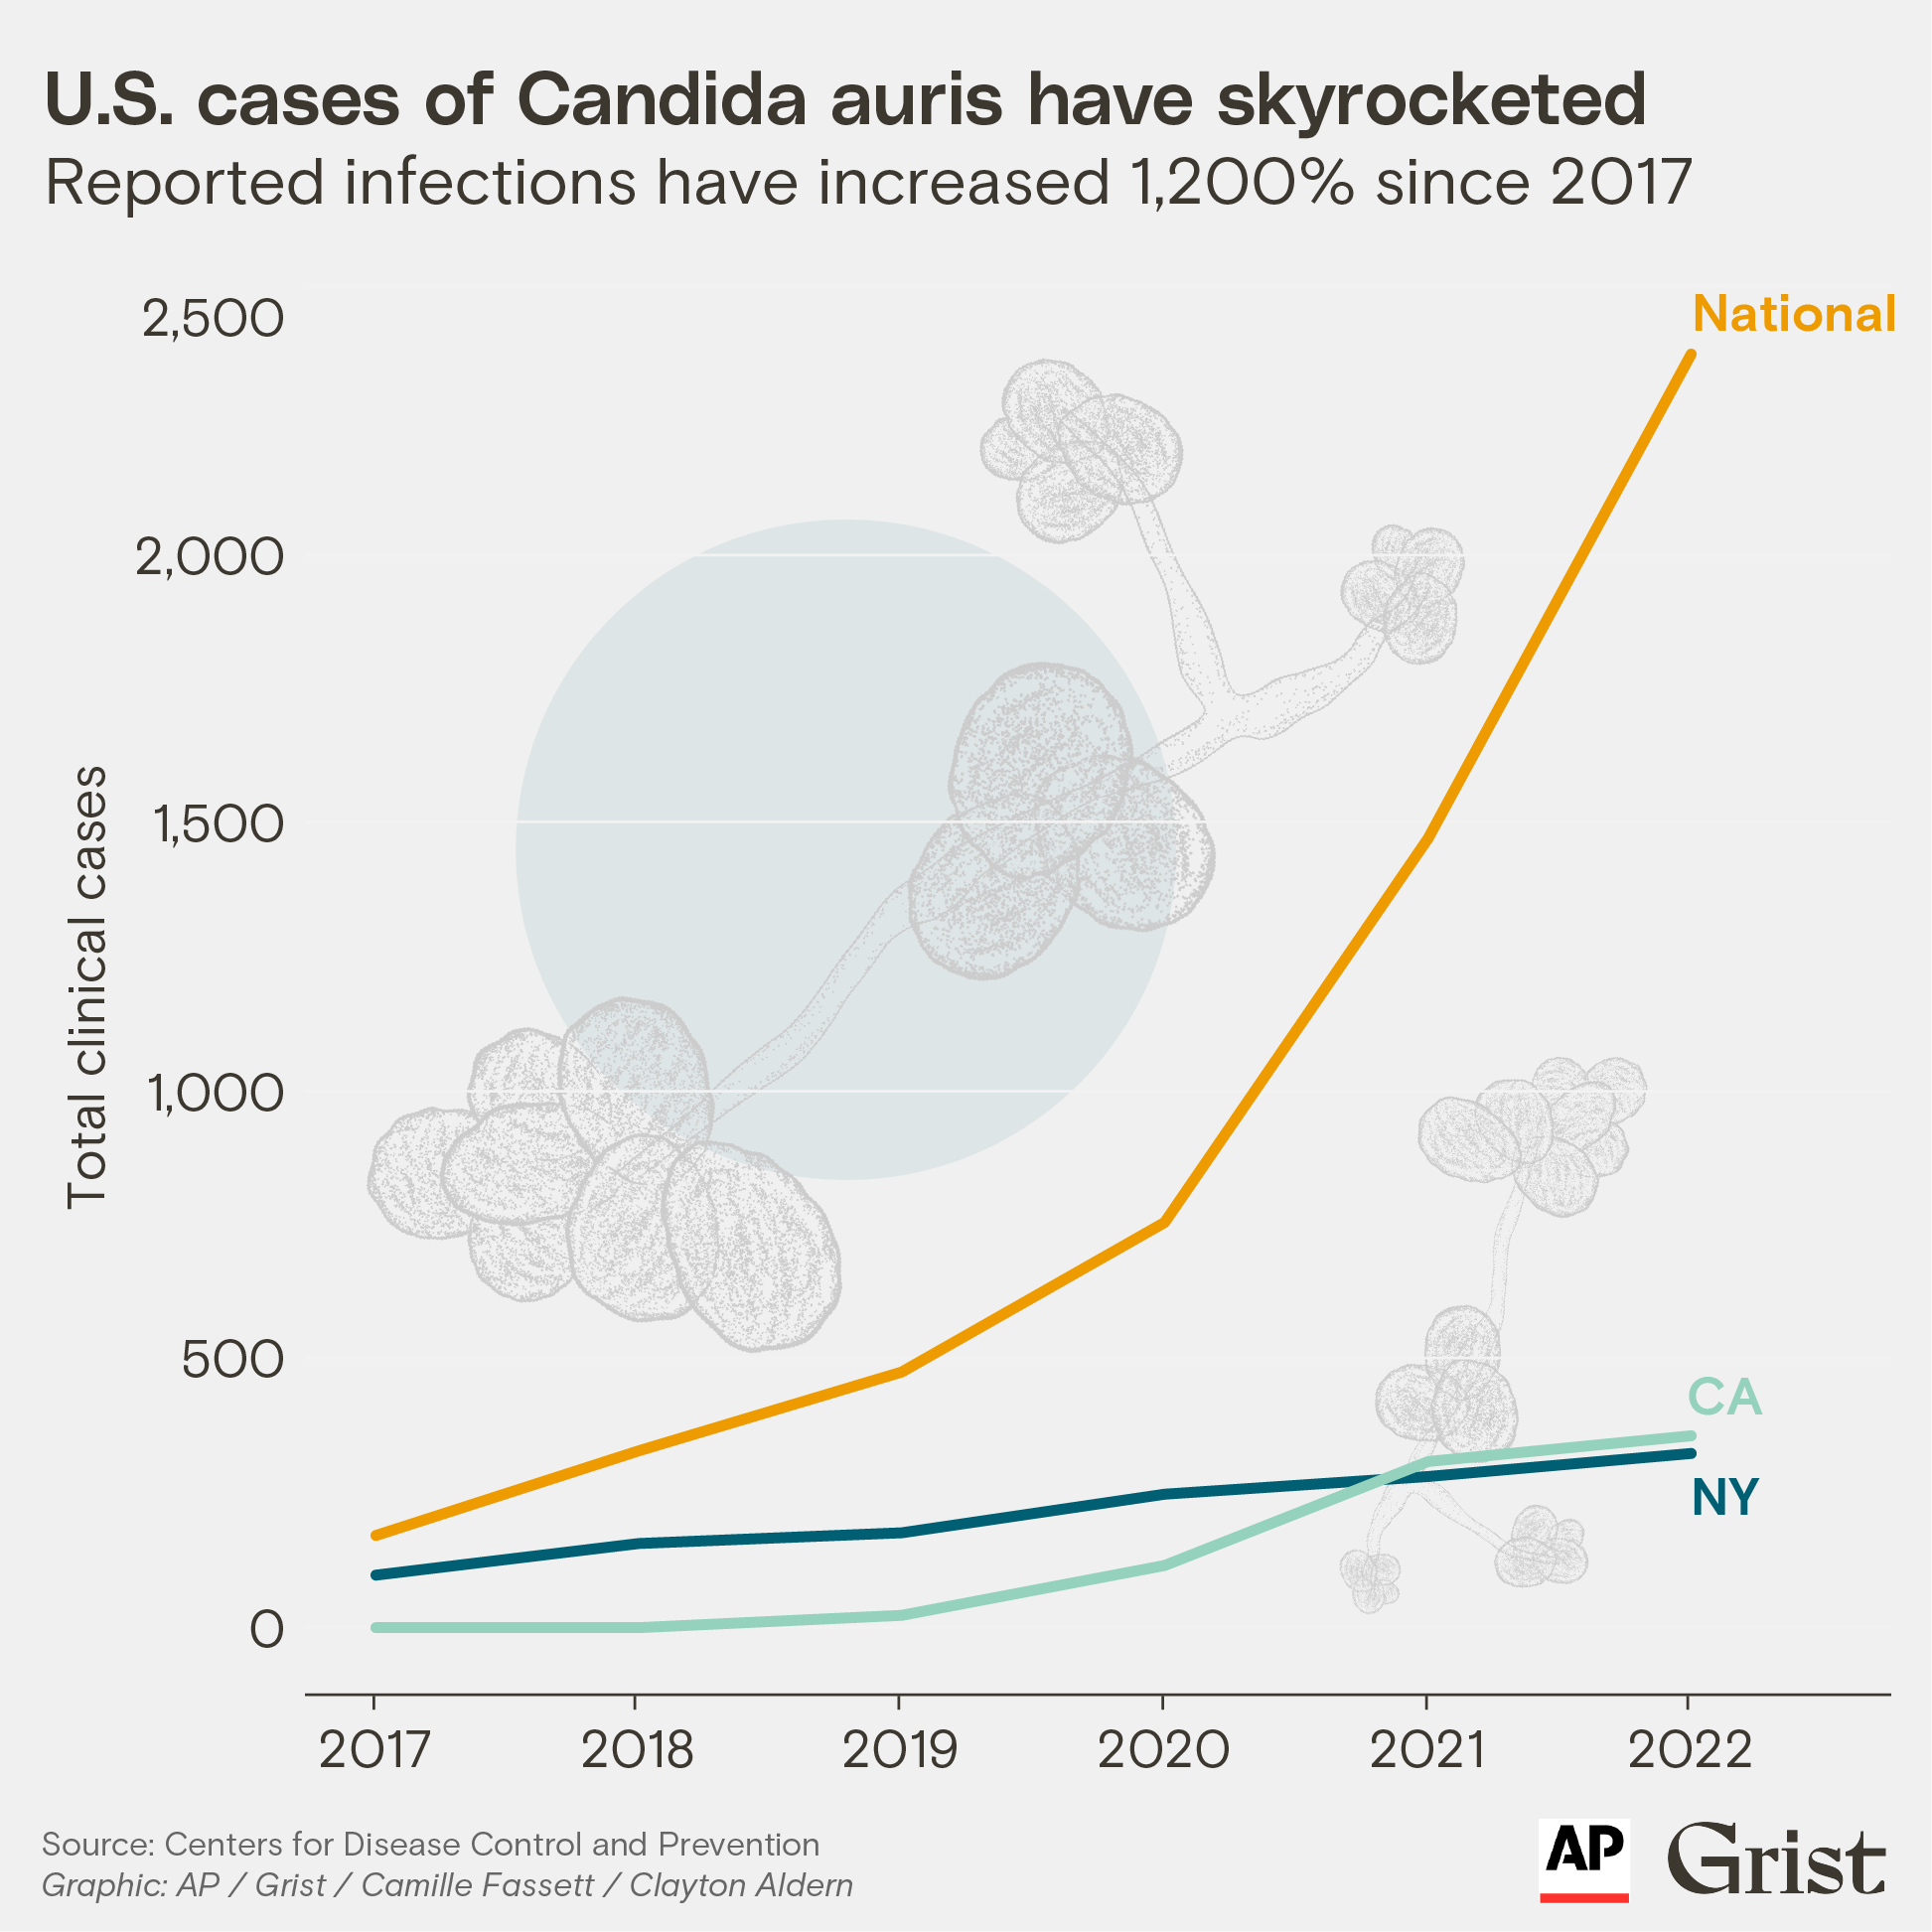 Line chart showing the rise of C. auris cases in the U.S.